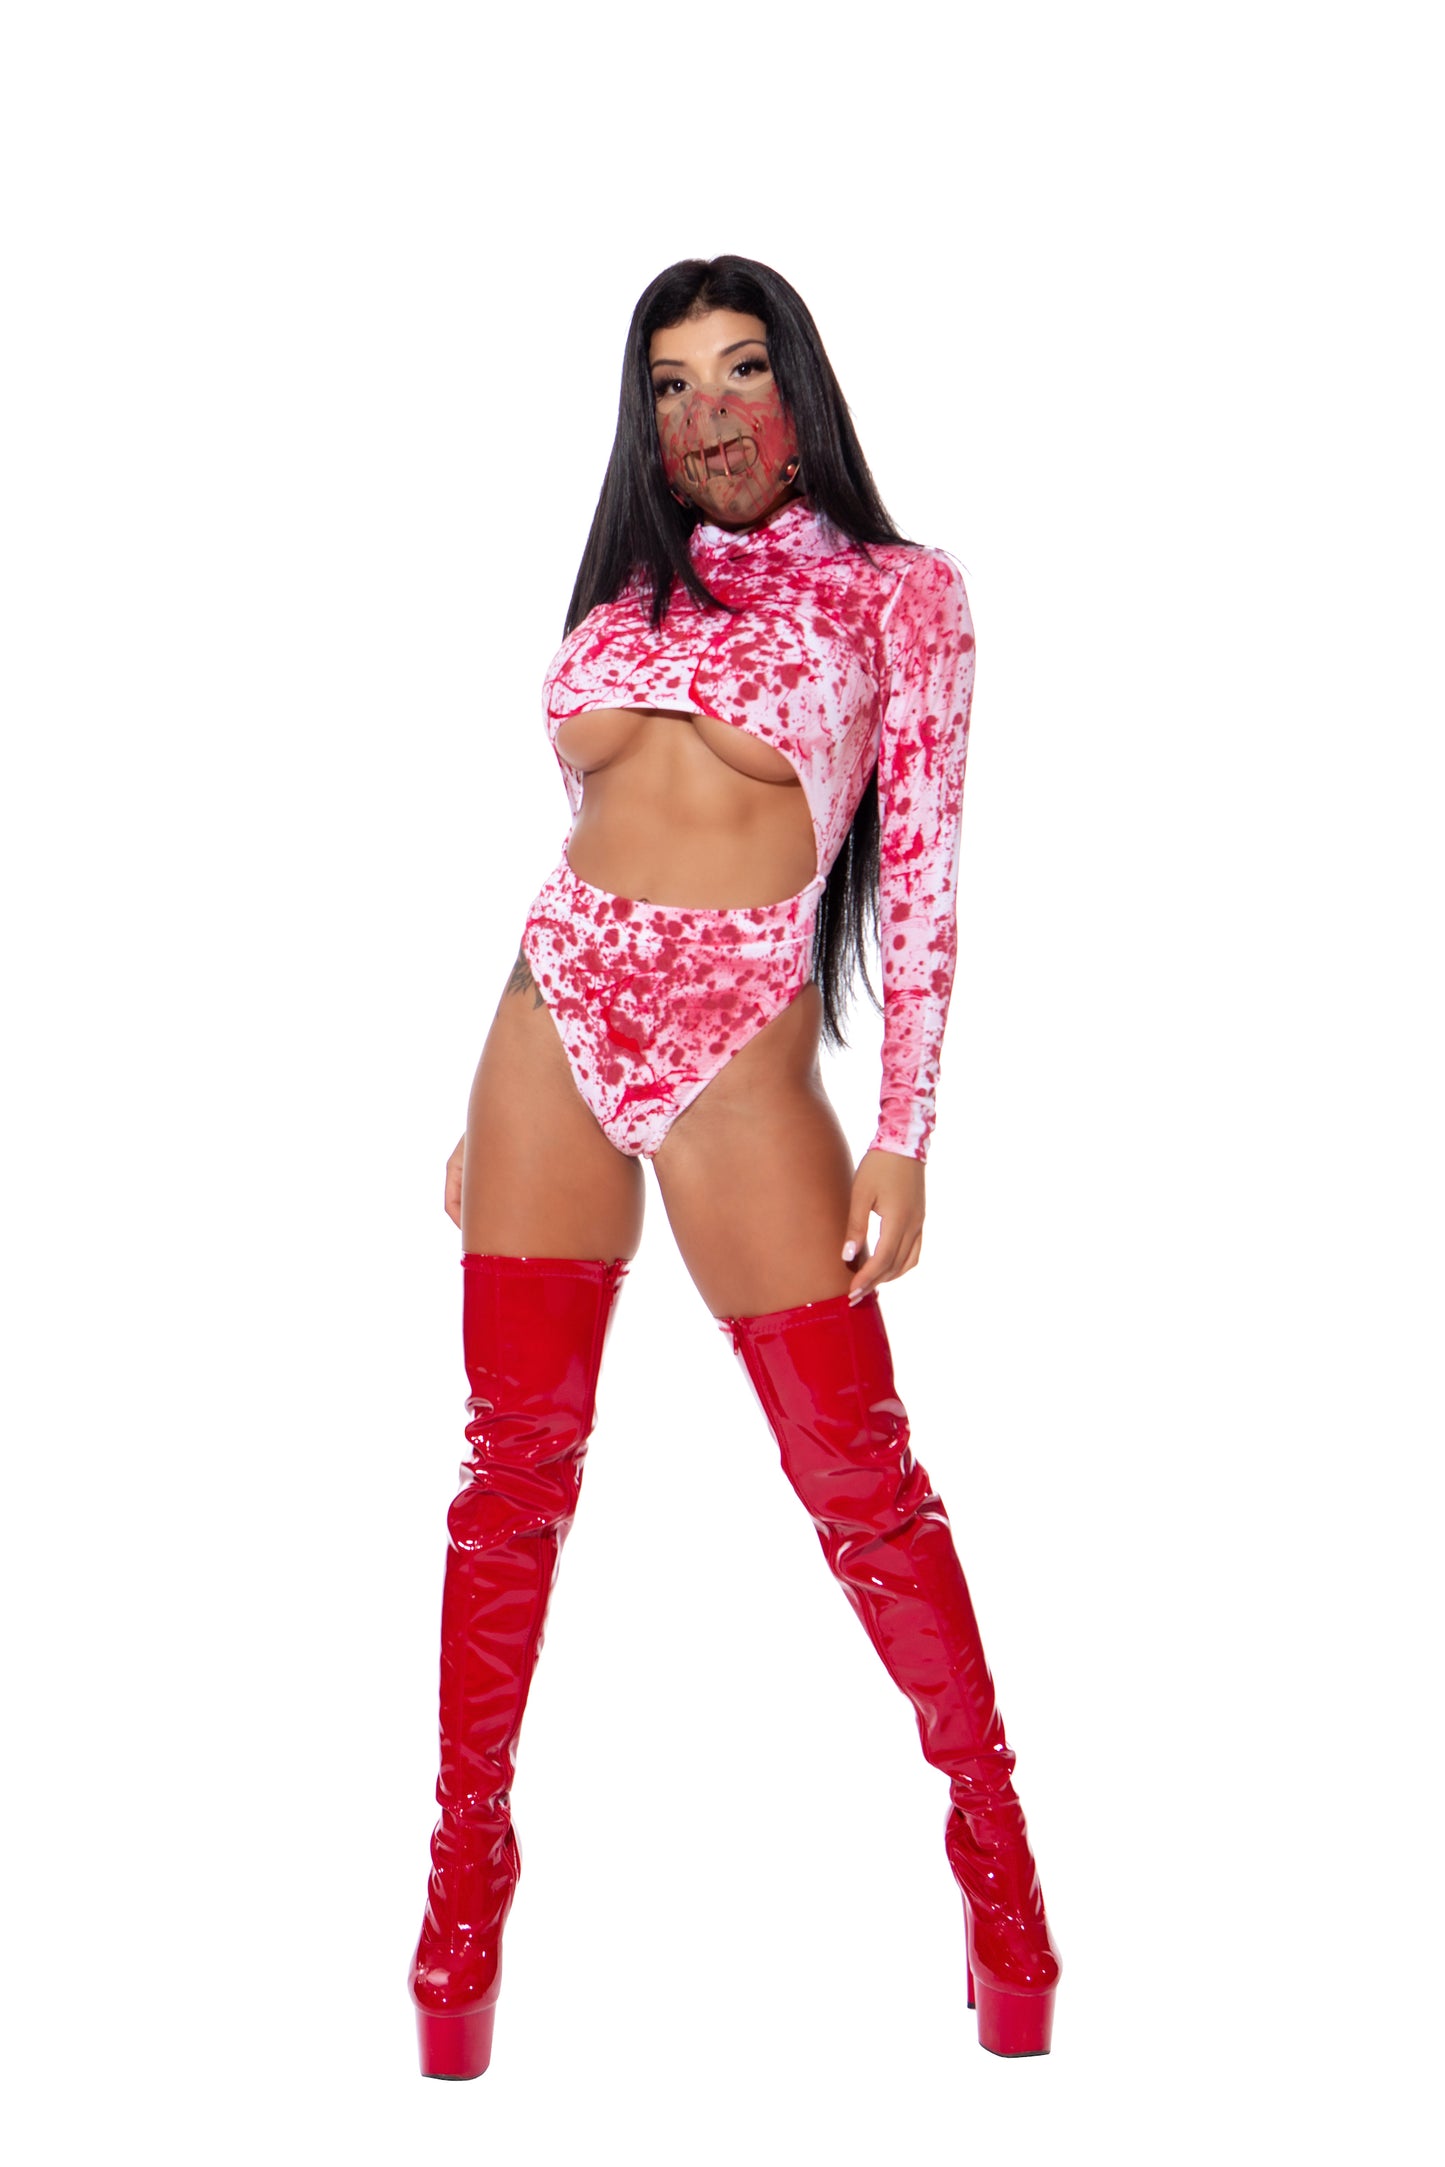 Legally Insane BLOODY Romper Playthings Exclusive *Limited Stock